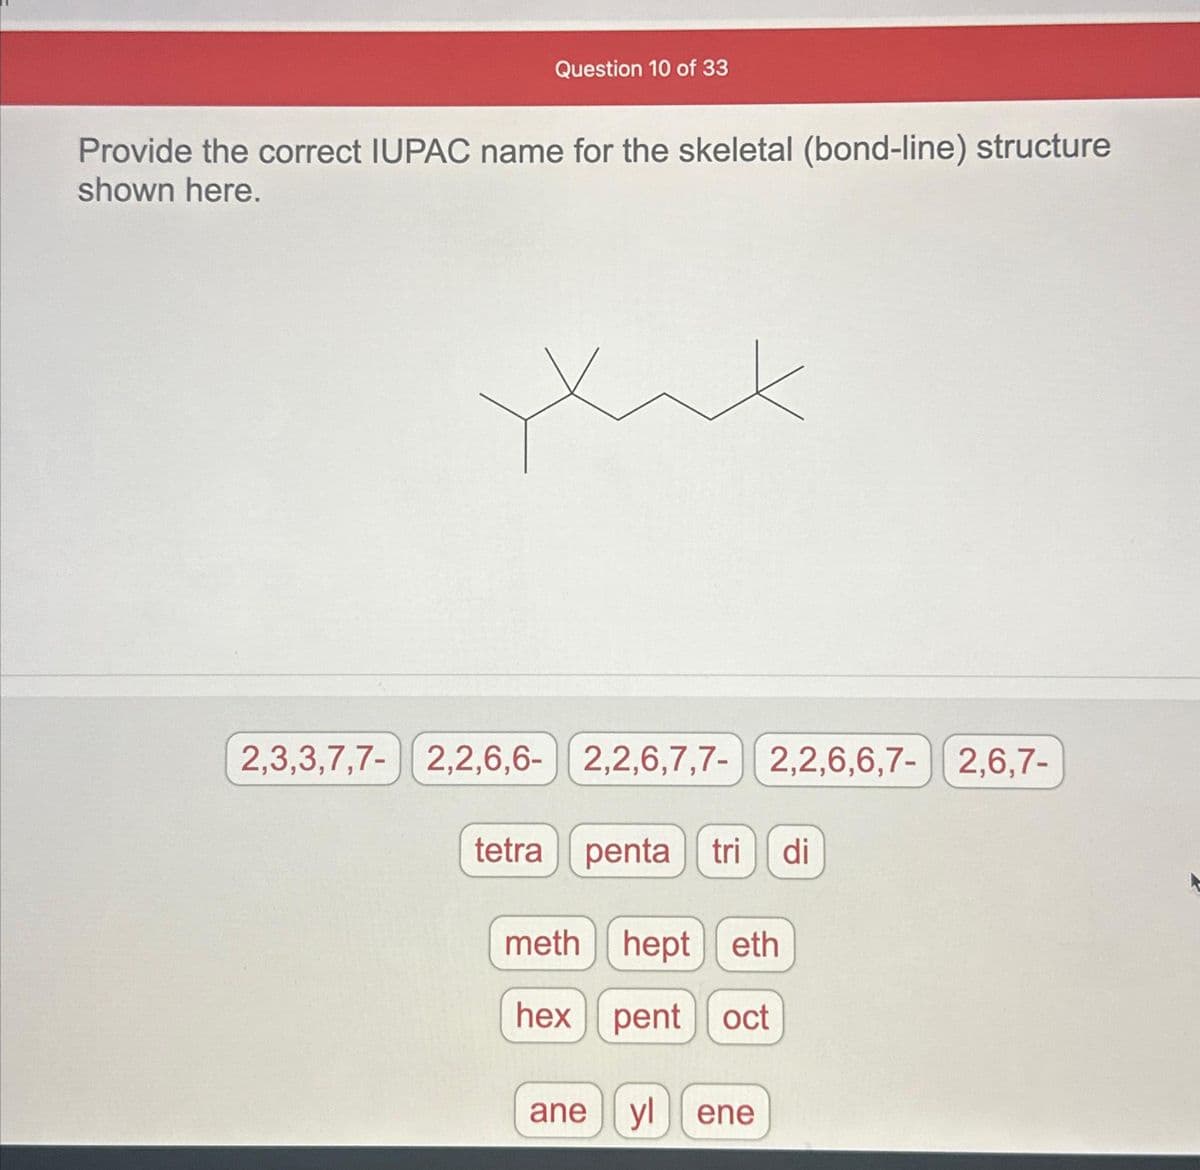 Question 10 of 33
Provide the correct IUPAC name for the skeletal (bond-line) structure
shown here.
yux
2,3,3,7,7- 2,2,6,6- 2,2,6,7,7- 2,2,6,6,7- 2,6,7-
tetra penta tri di
meth hept eth
hex pent oct
ane ylene